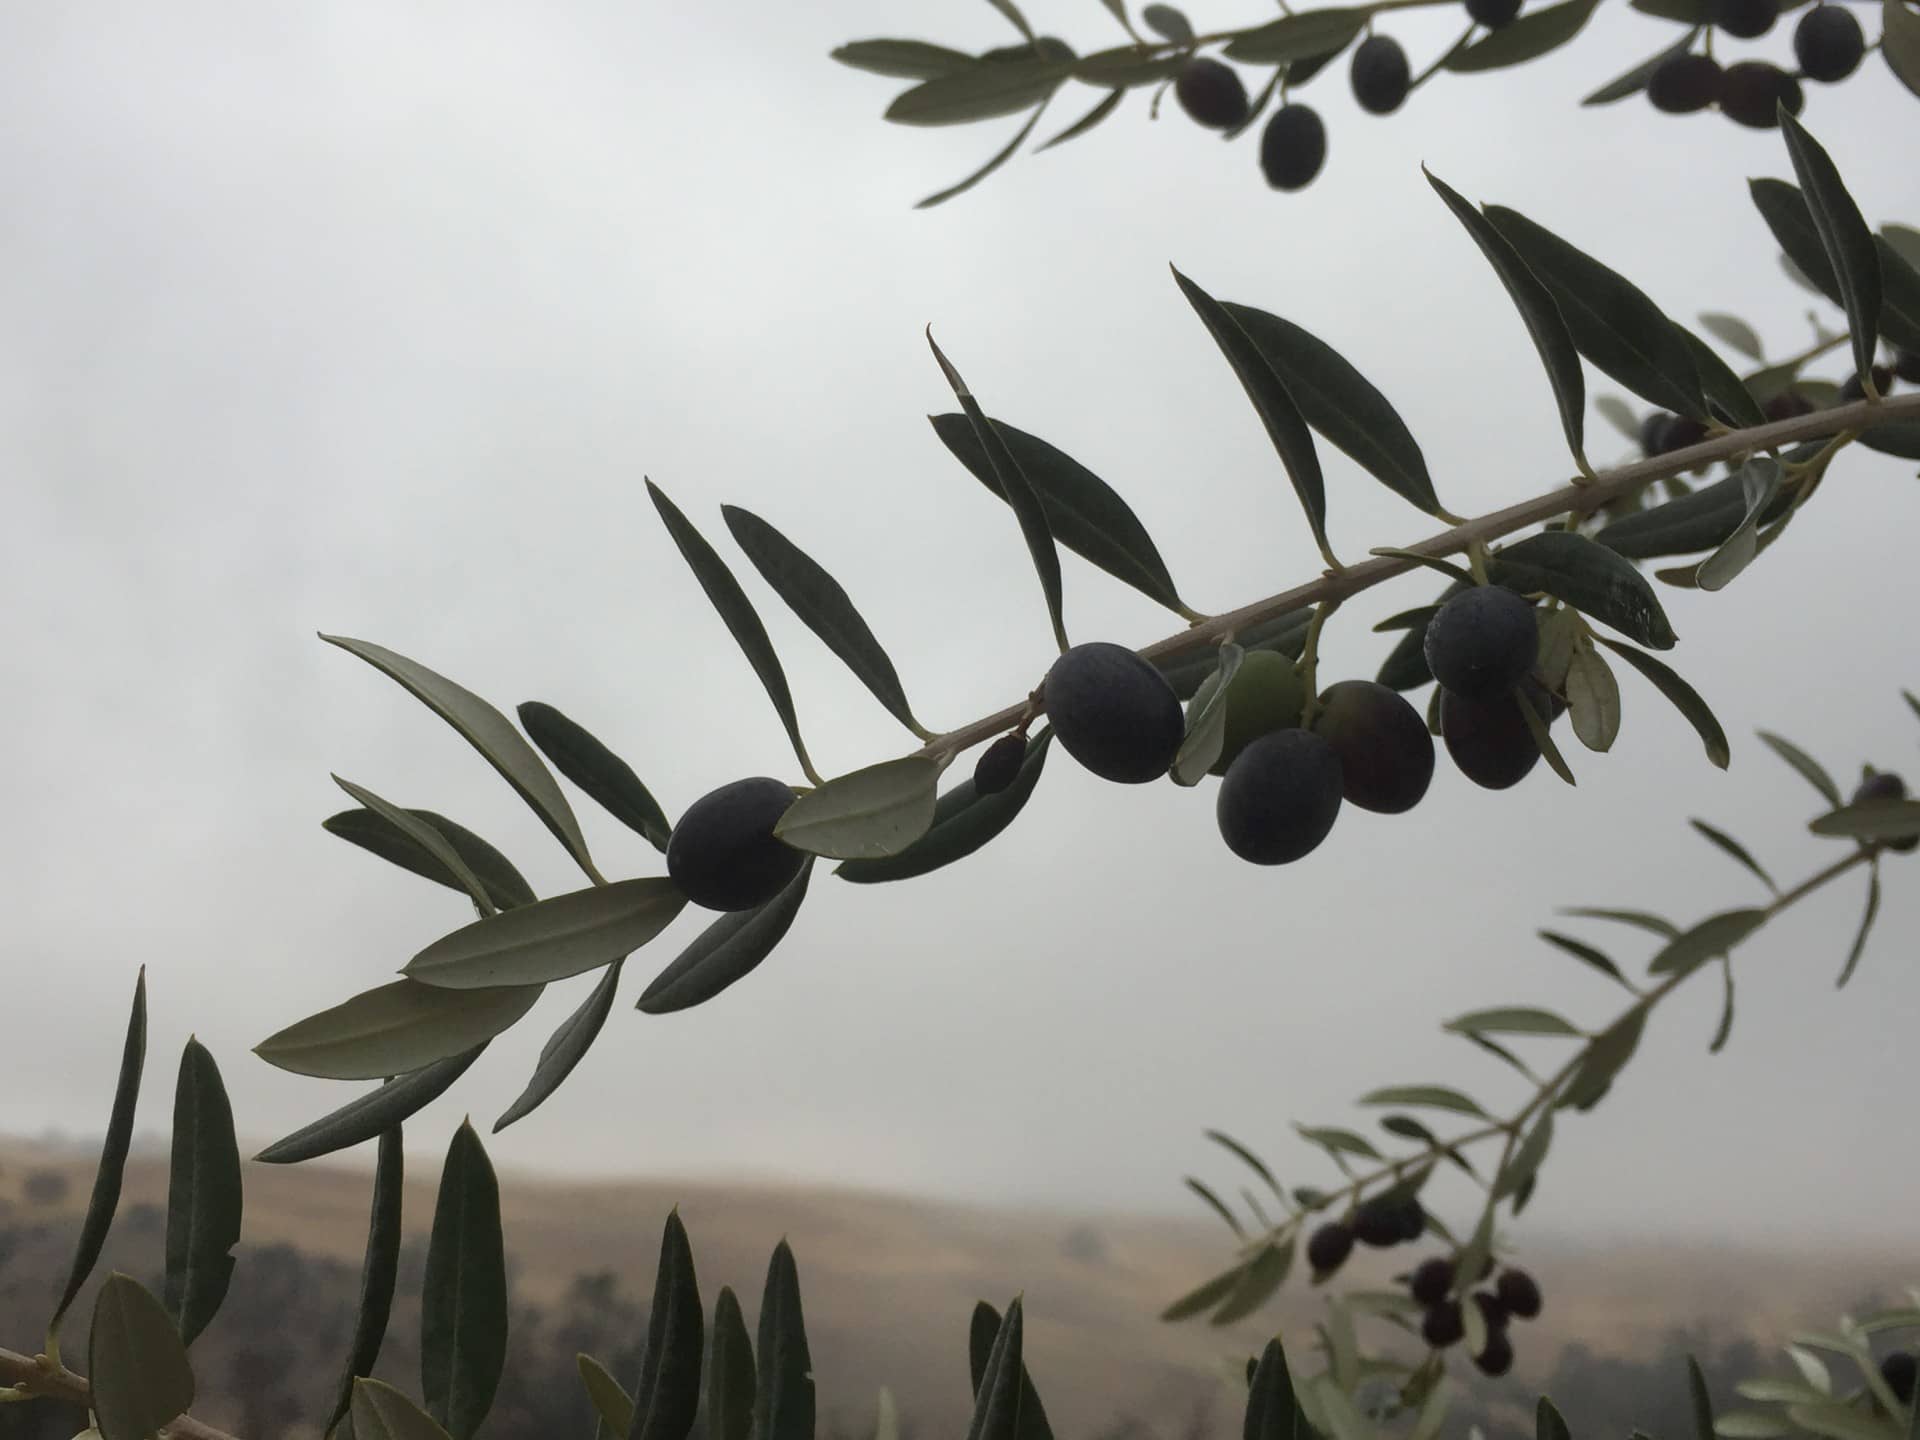 north-america-profiles-production-the-best-olive-oils-olive-oil-times